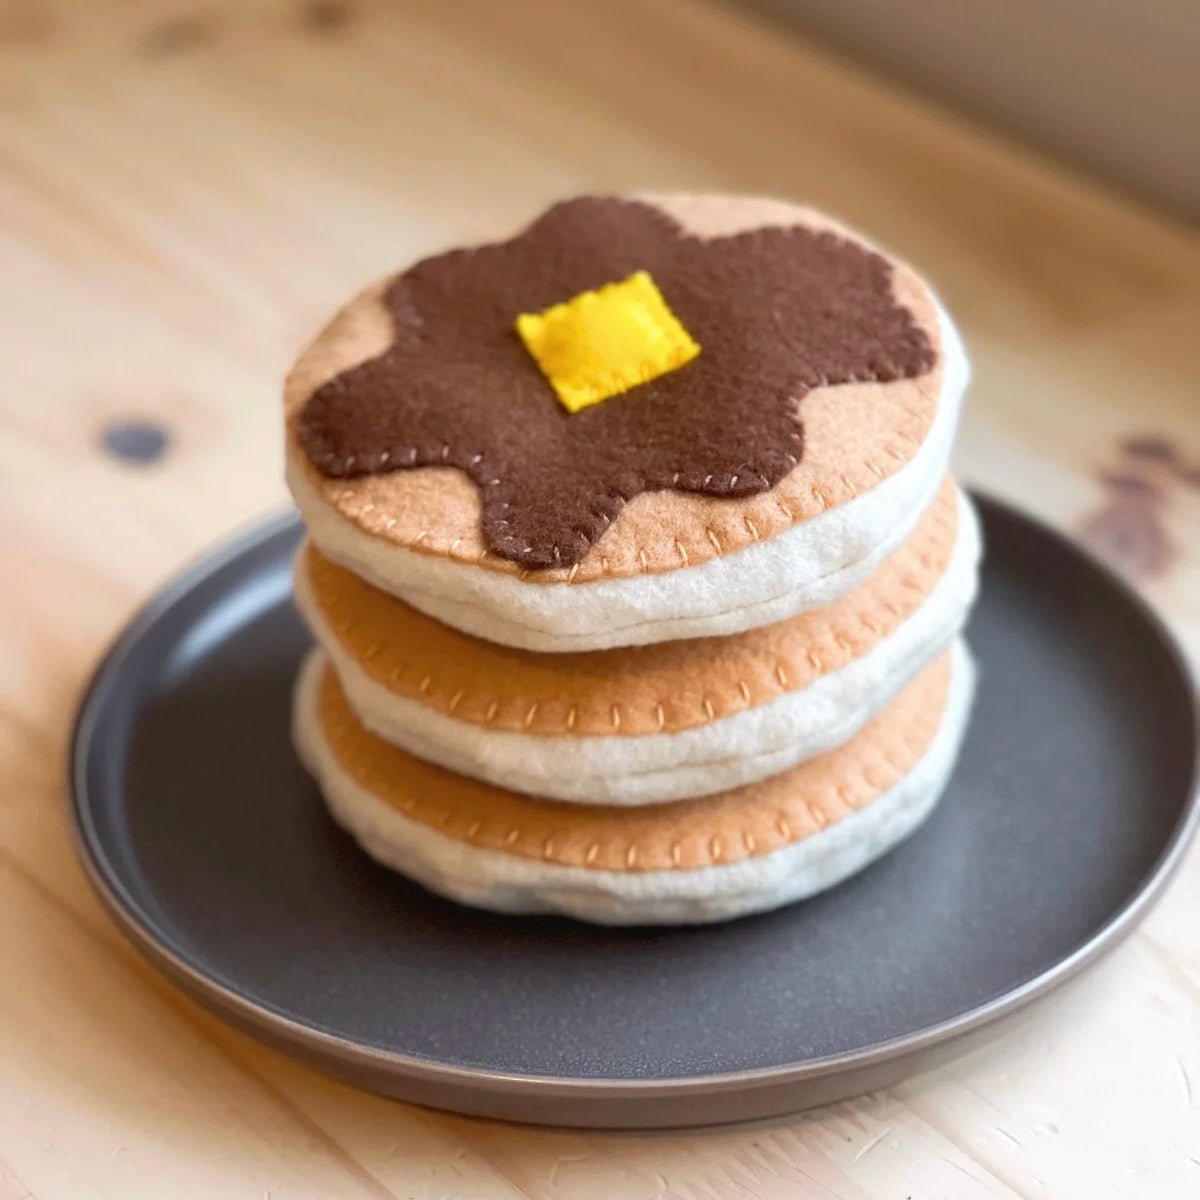 felt pancakes play food made in usa